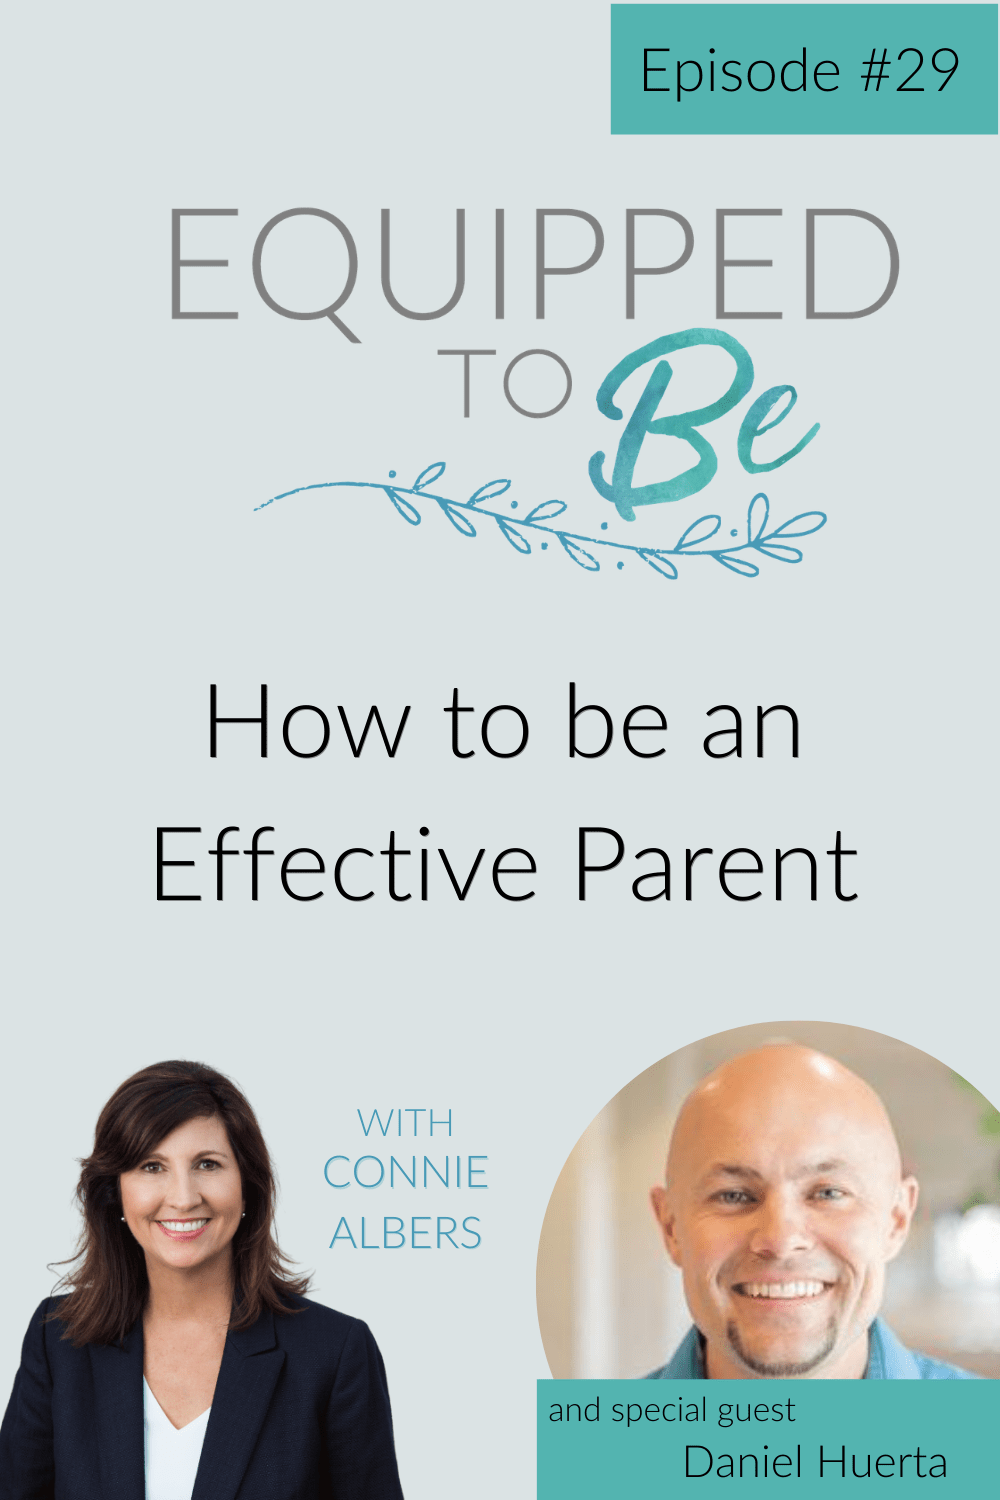 How to be an Effective Parent with Daniel Huerta - ETB #29